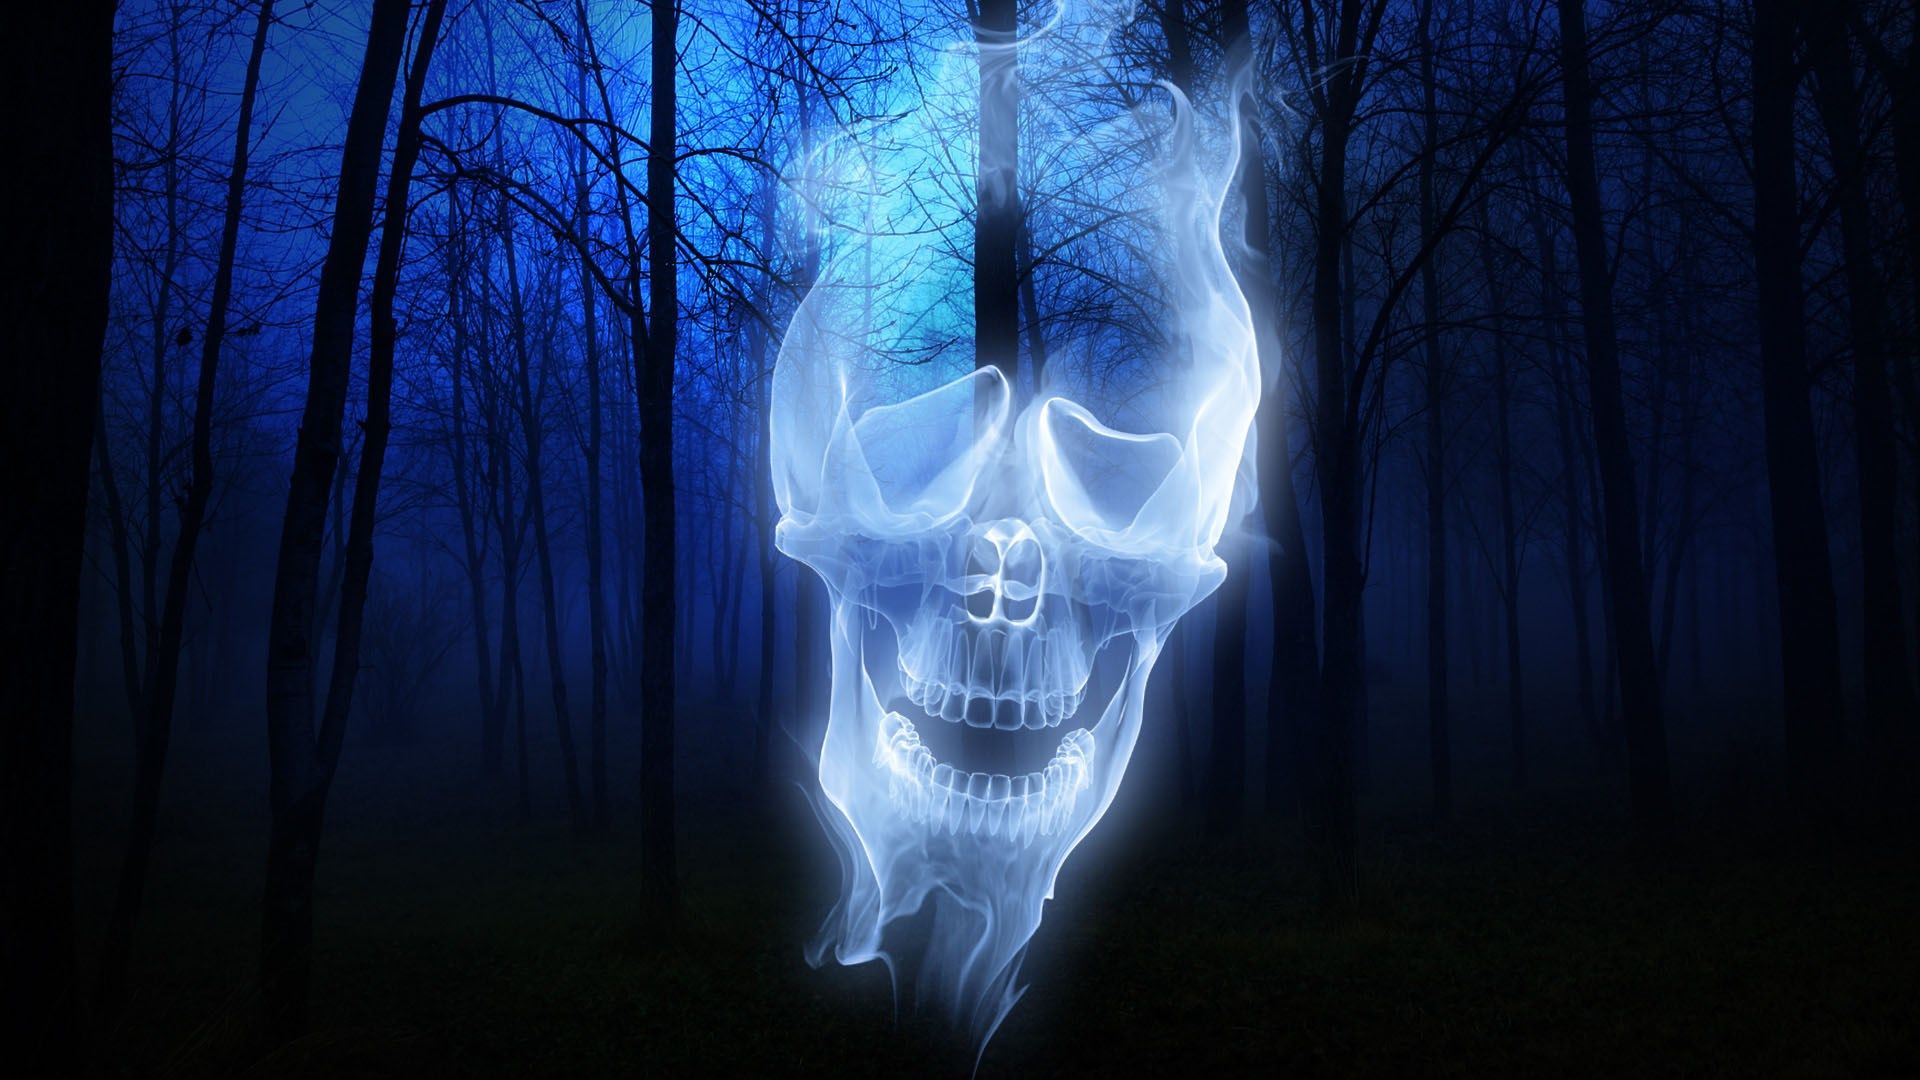 ghost free wallpaper and screensavers. Skull wallpaper, Ghost image, Ghost picture